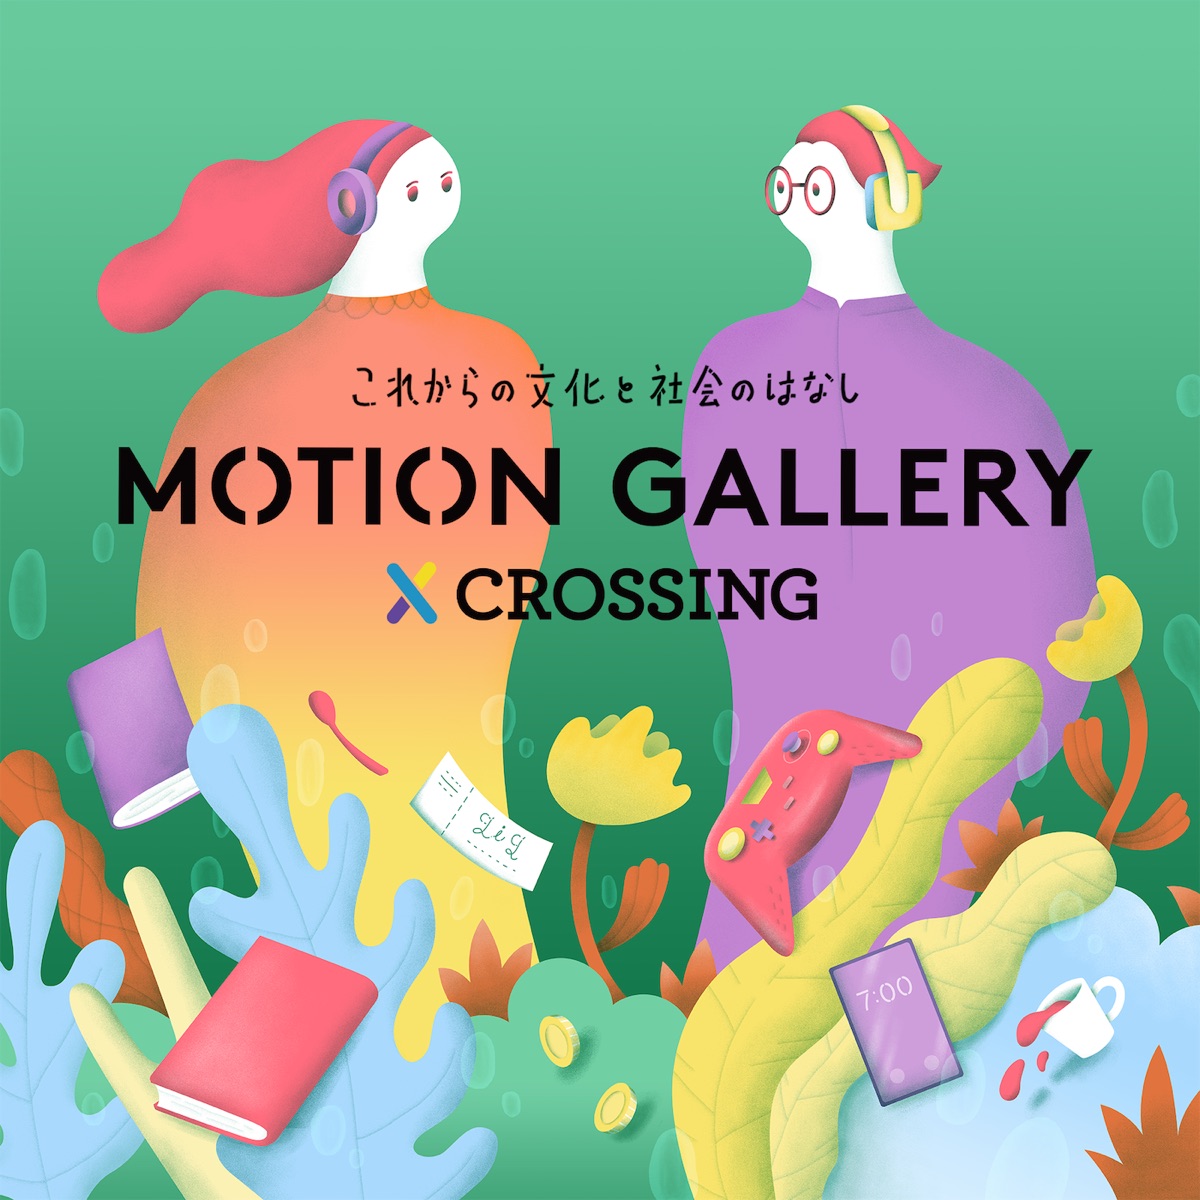 Motion Gallery Crossing モーションギャラリークロッシング Podcast Podtail